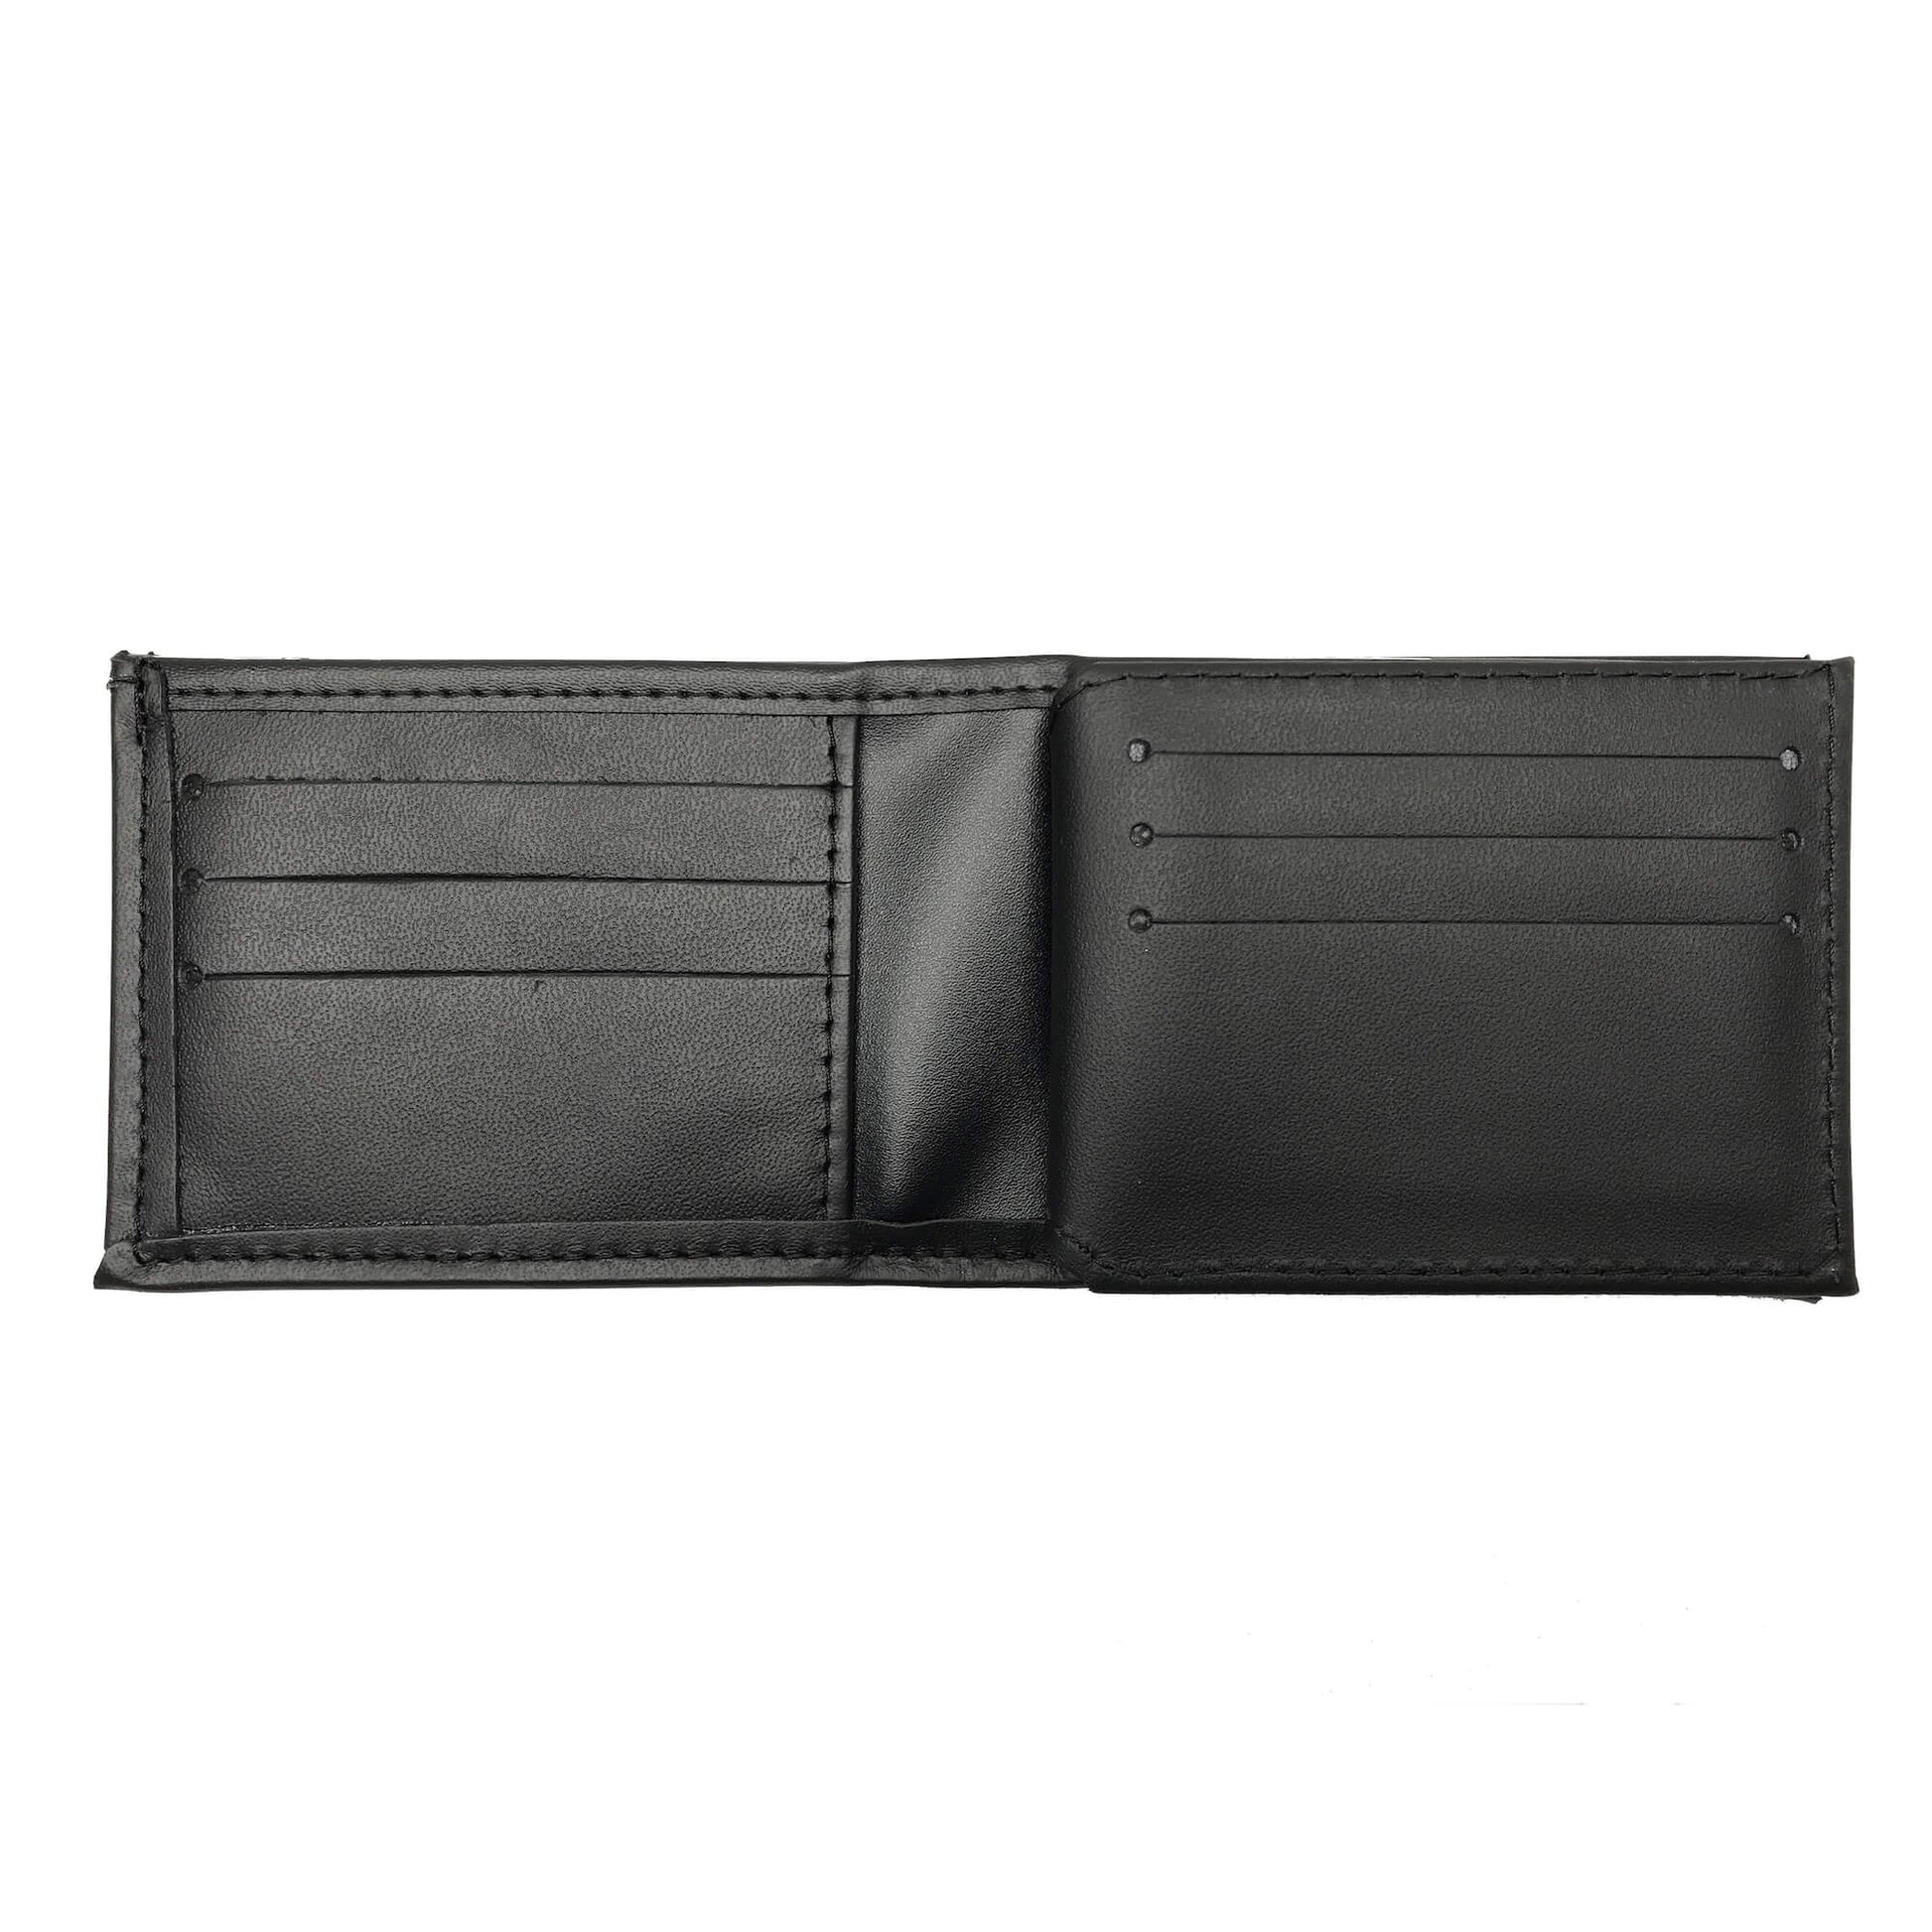 Lacombe Police Service Hidden Badge Wallet-Perfect Fit-911 Duty Gear Canada